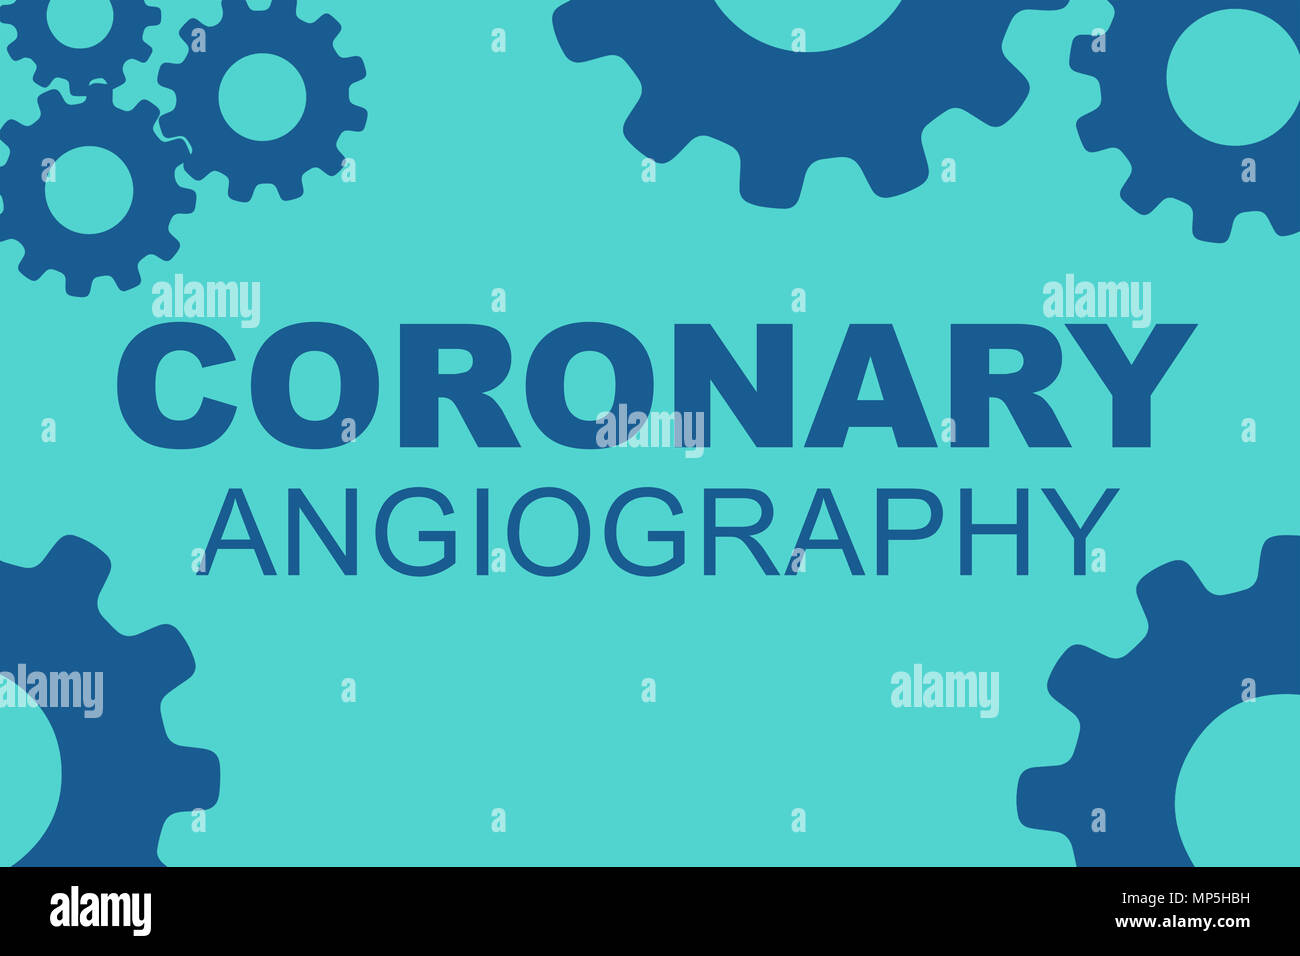 CORONARY ANGIOGRAPHY sign concept illustration with red gear wheel figures on yellow background Stock Photo